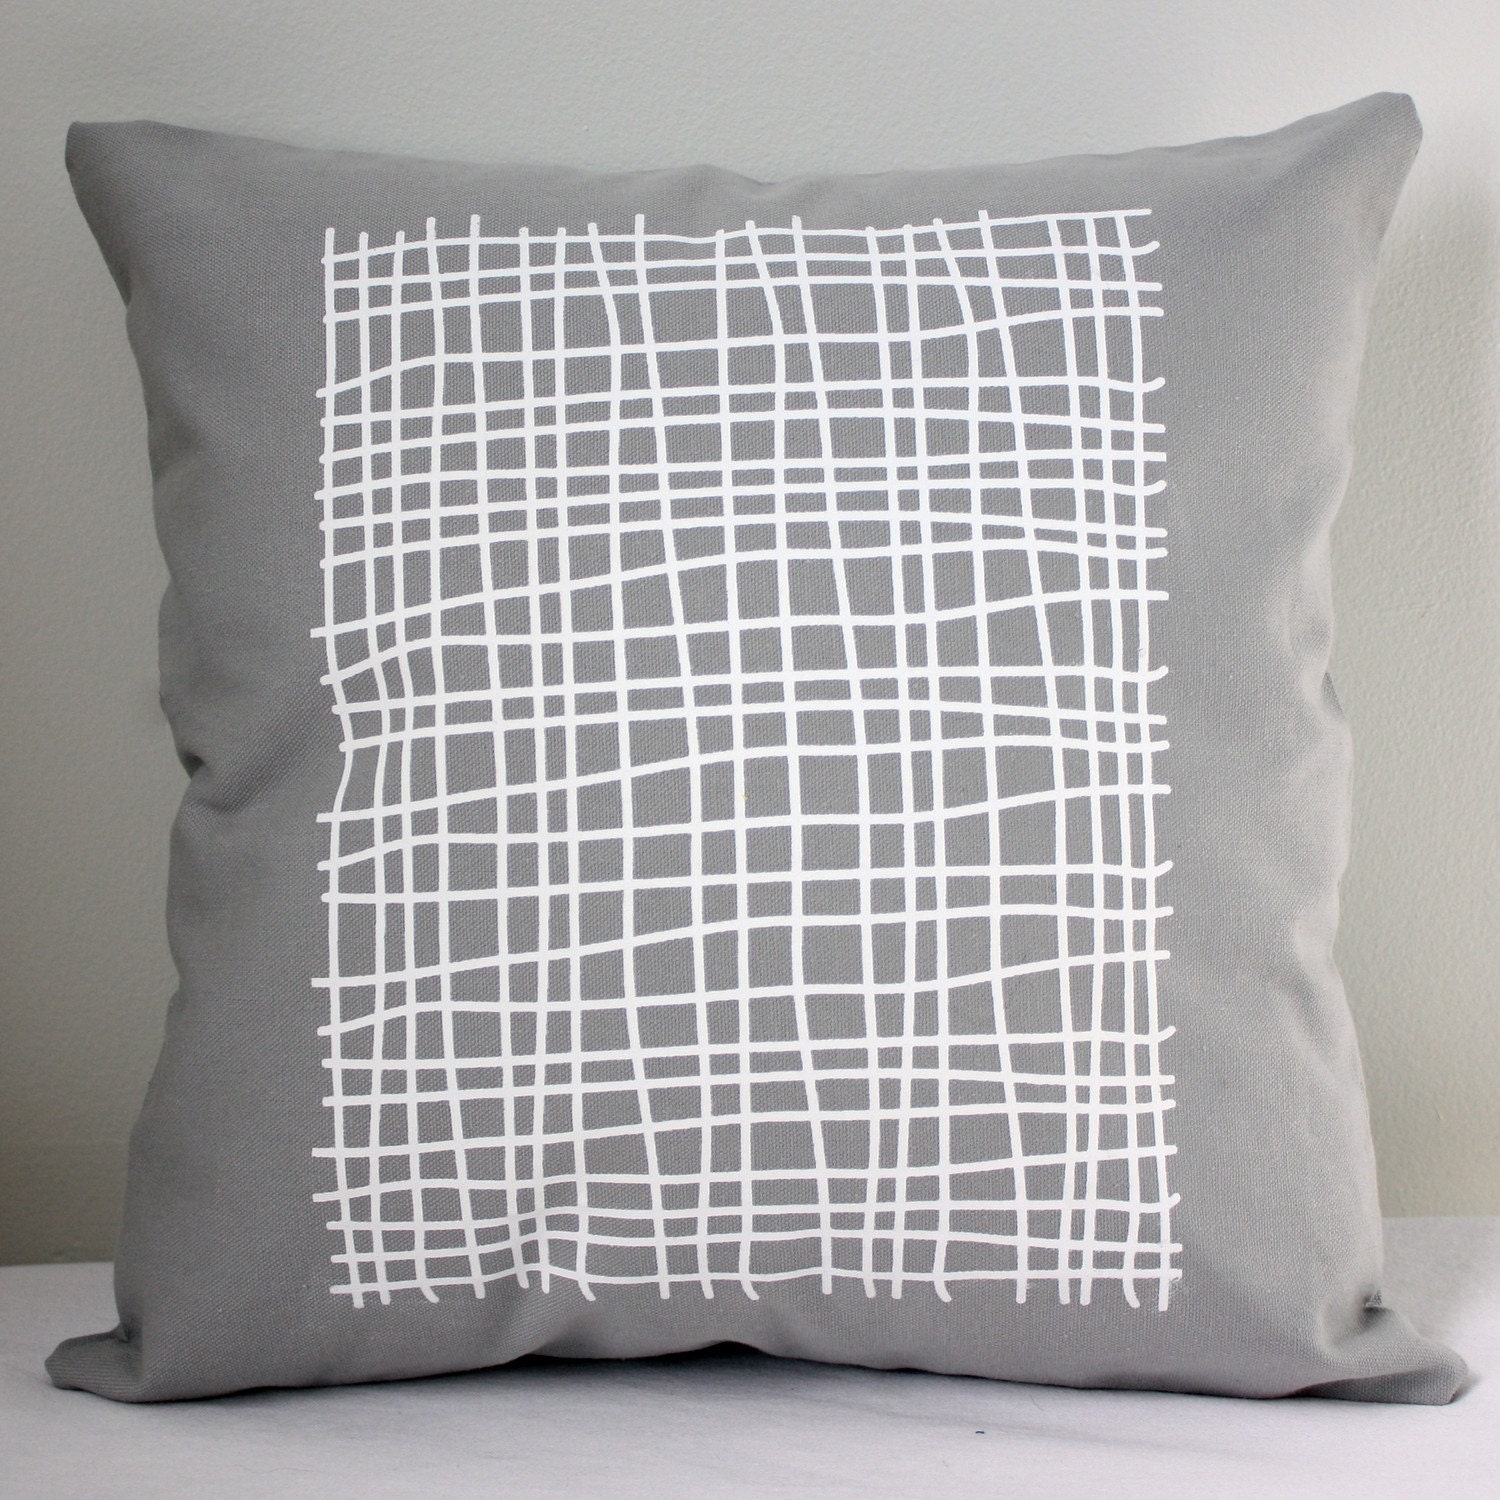 16 in Square Throw Pillow - Light Gray with Grid print in white - wickedmint